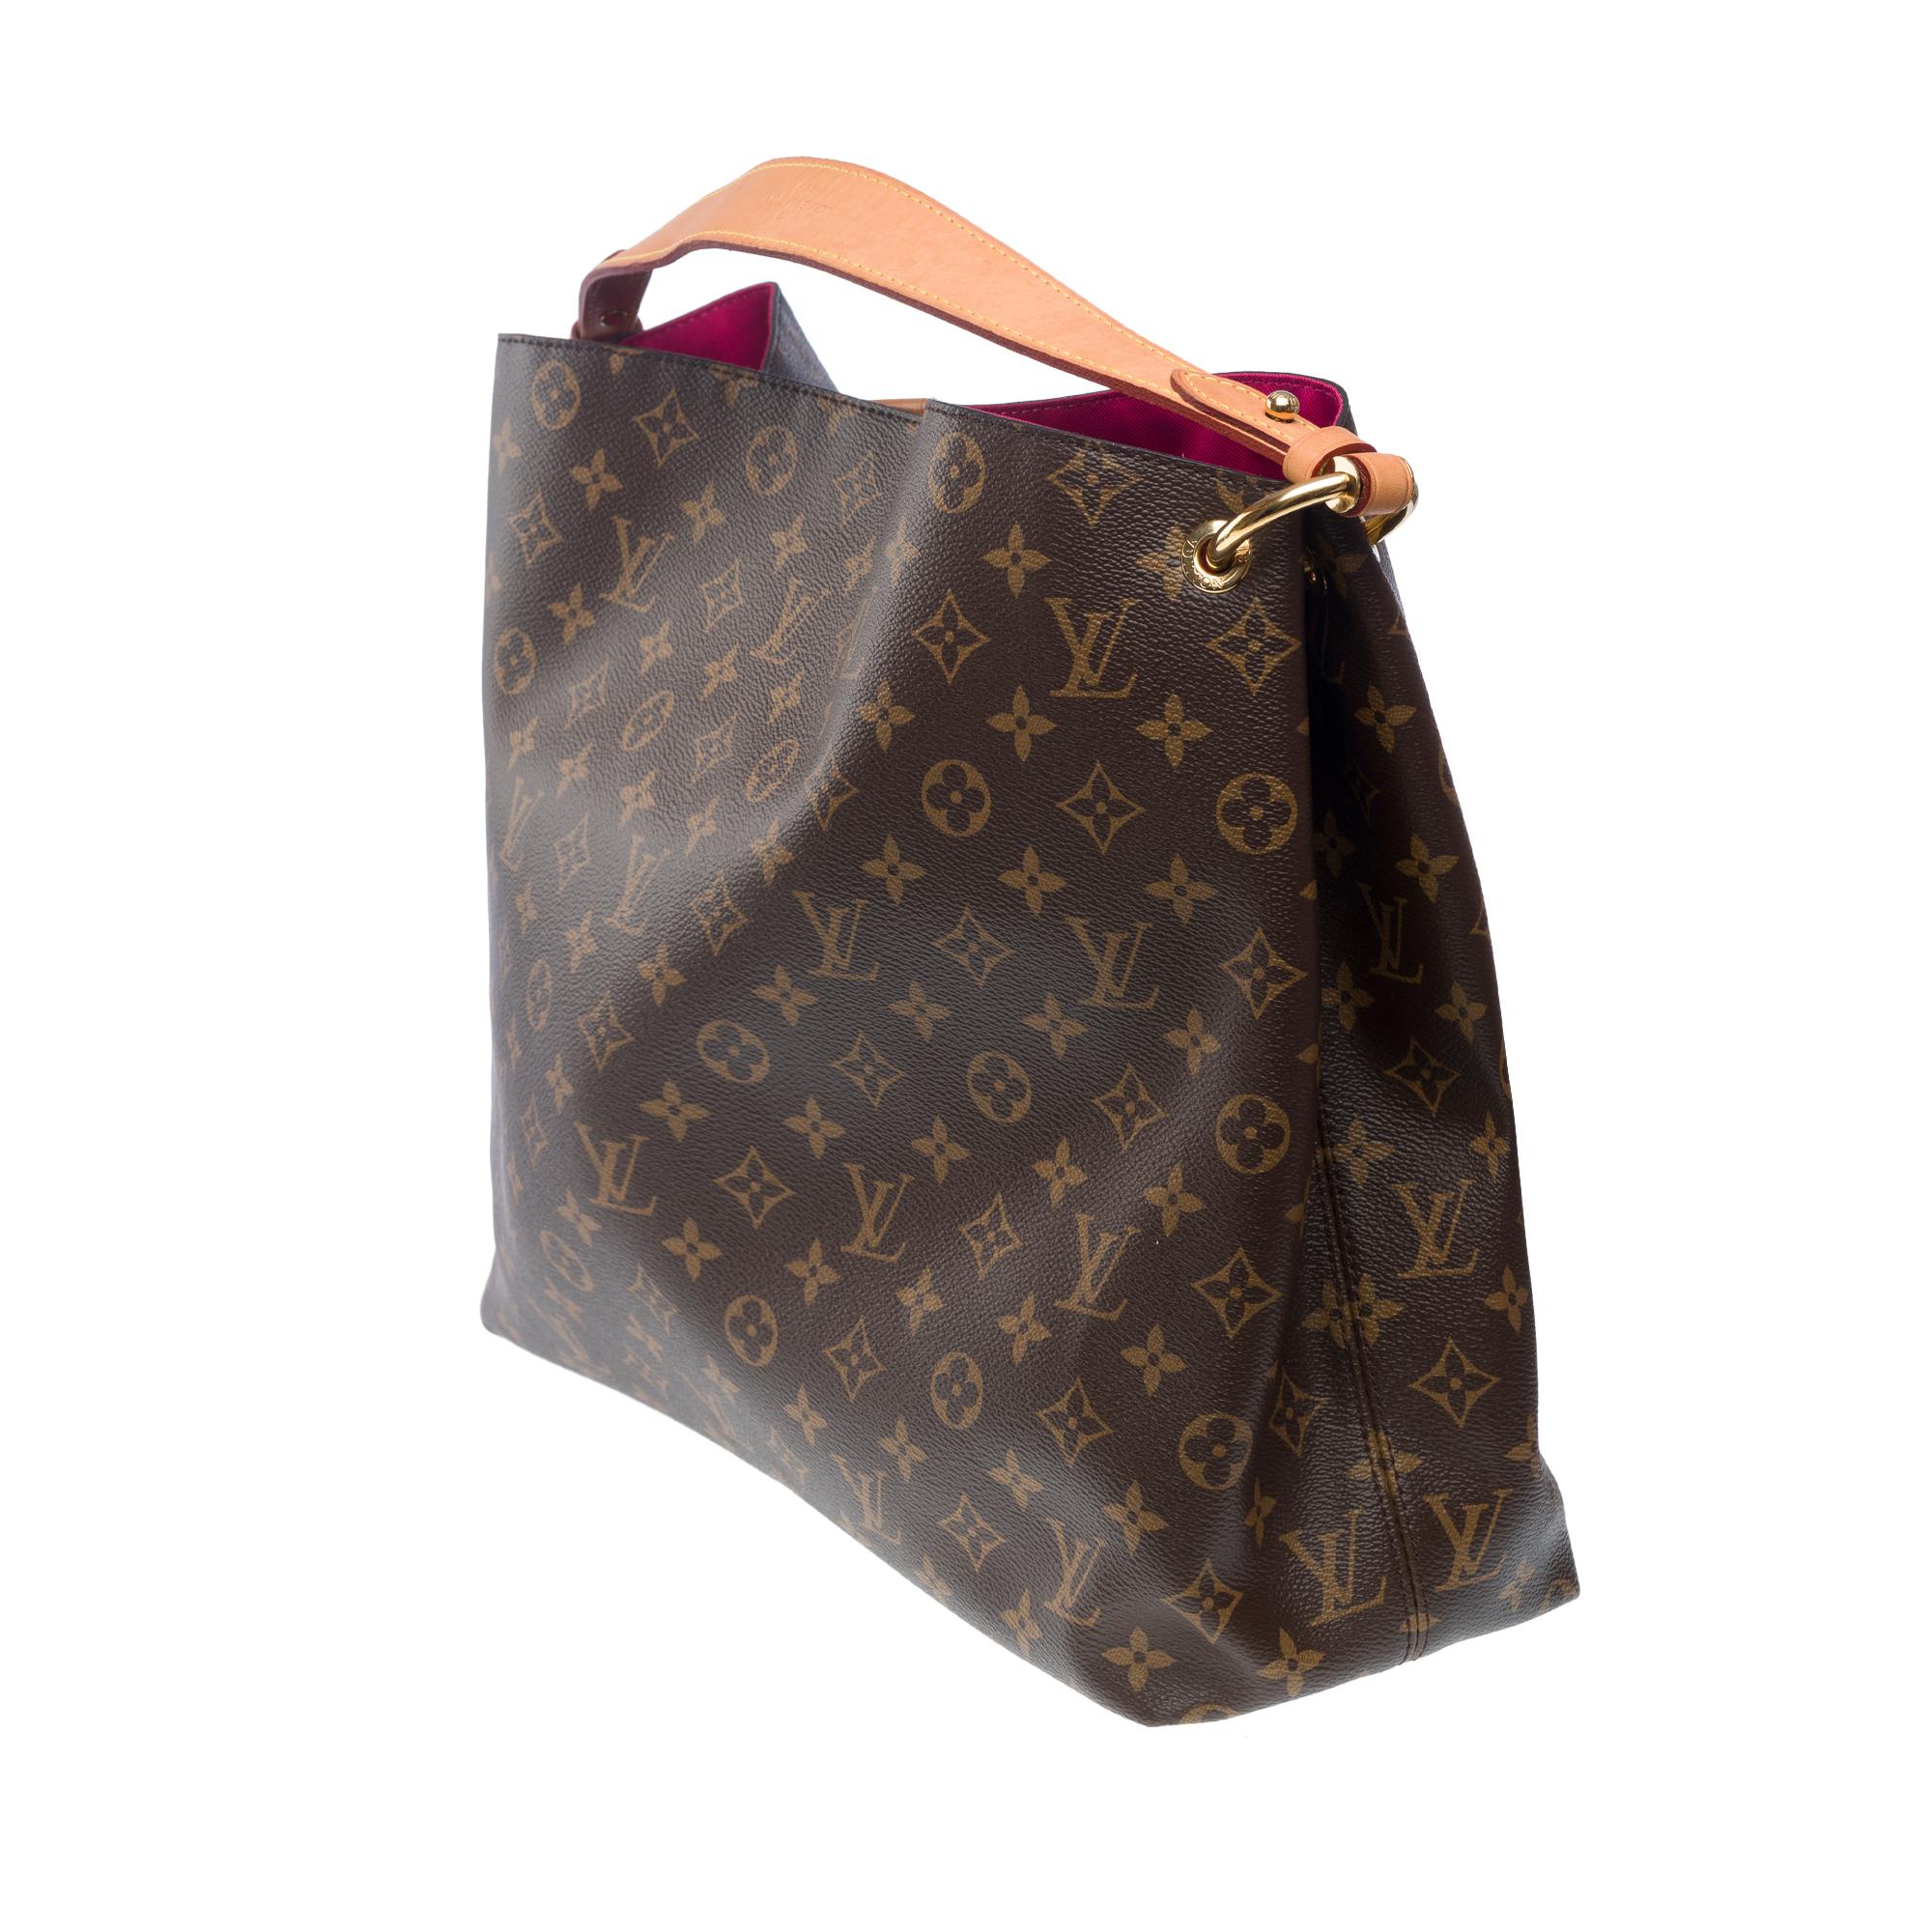 Louis Vuitton Graceful MM Tote bag in brown Monogram canvas, GHW For Sale 2